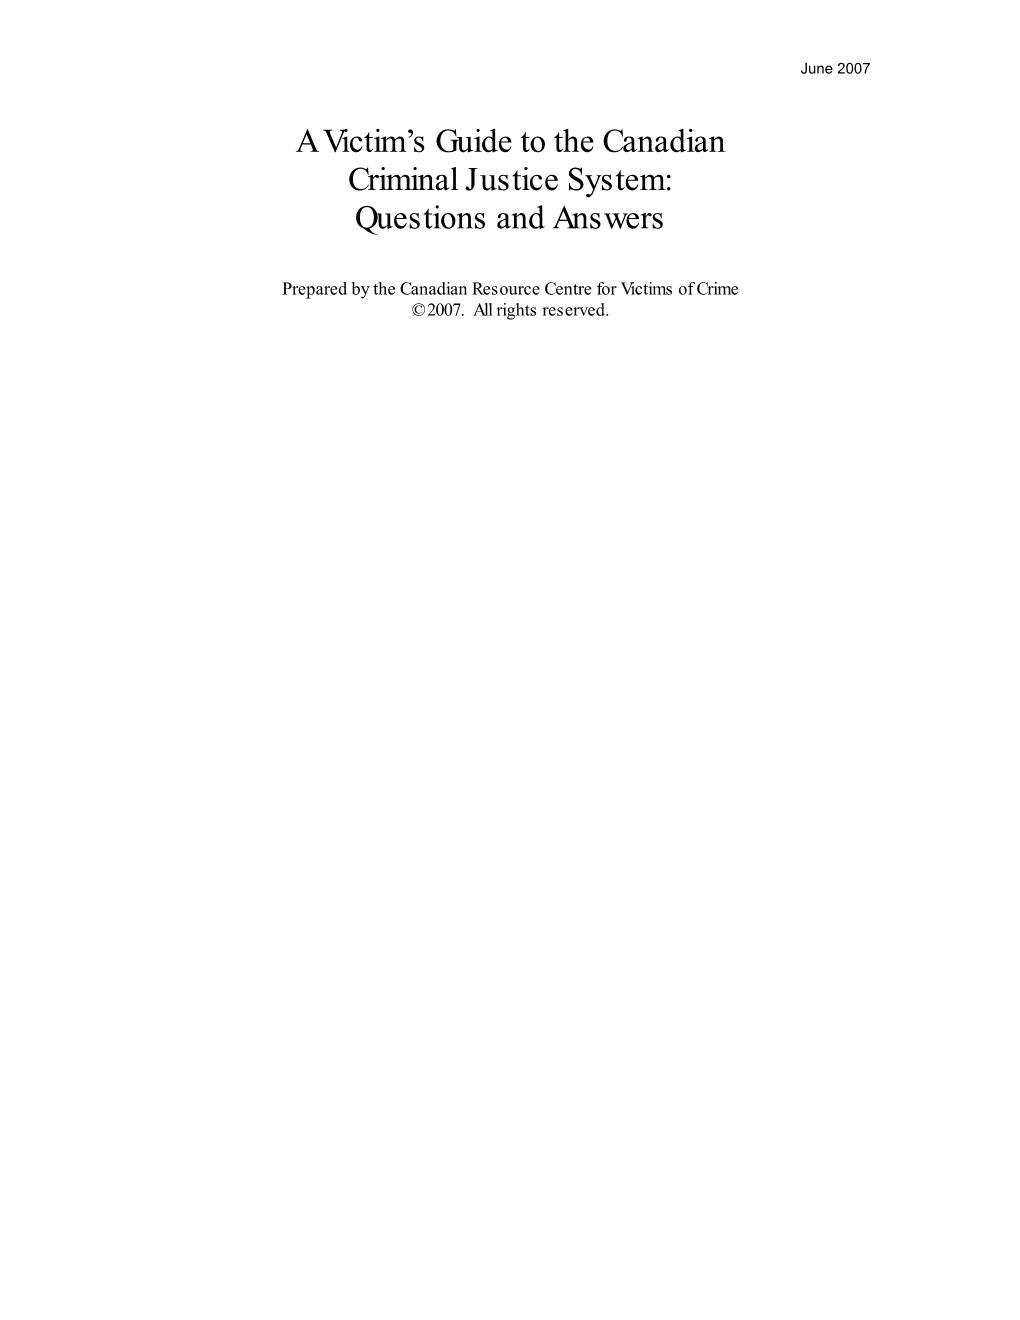 A Victim's Guide to the Canadian Criminal Justice System: Questions